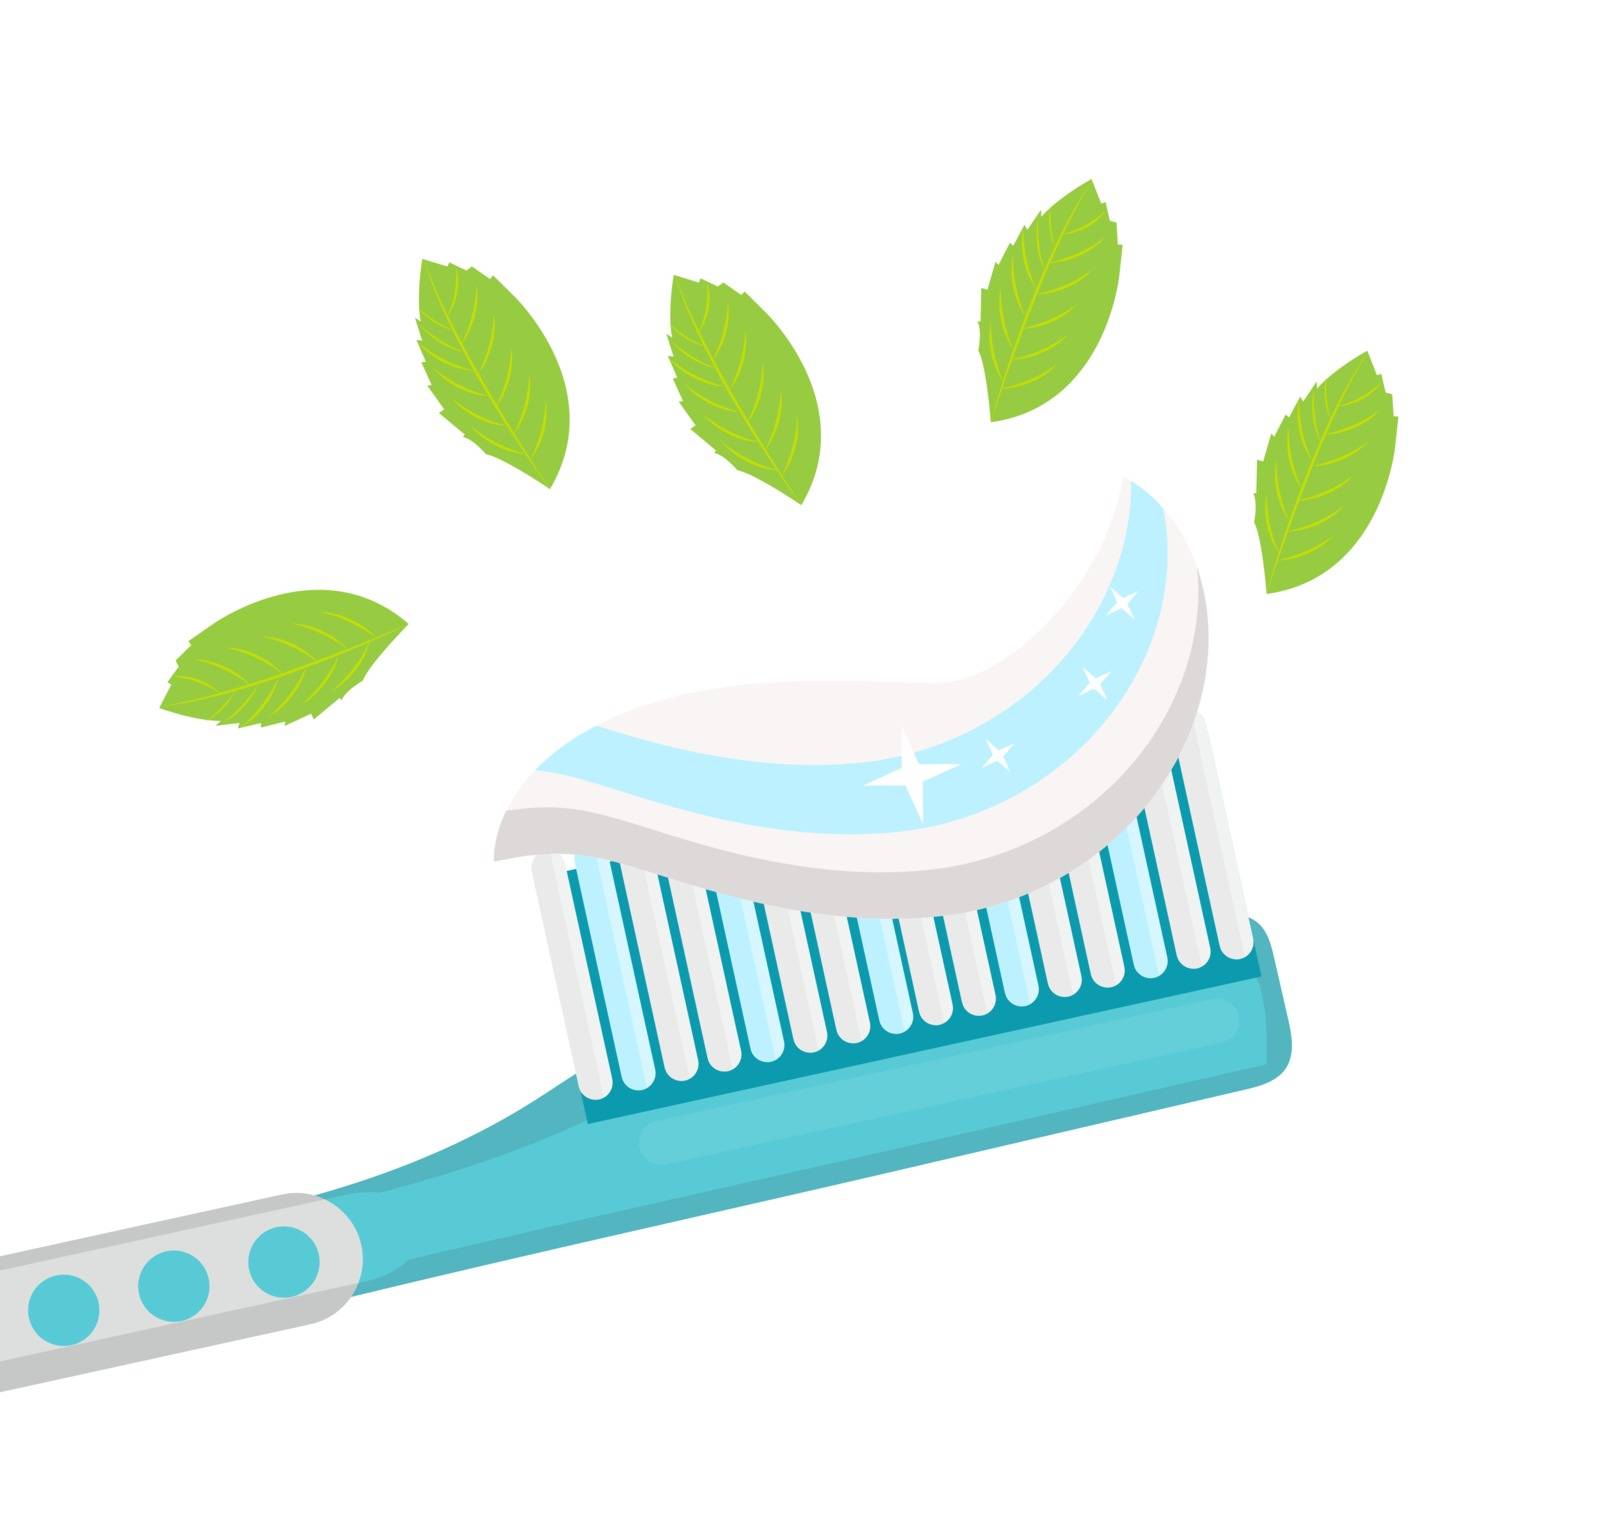 Toothbrush with mint paste. Isolated on white background. Vector illustration